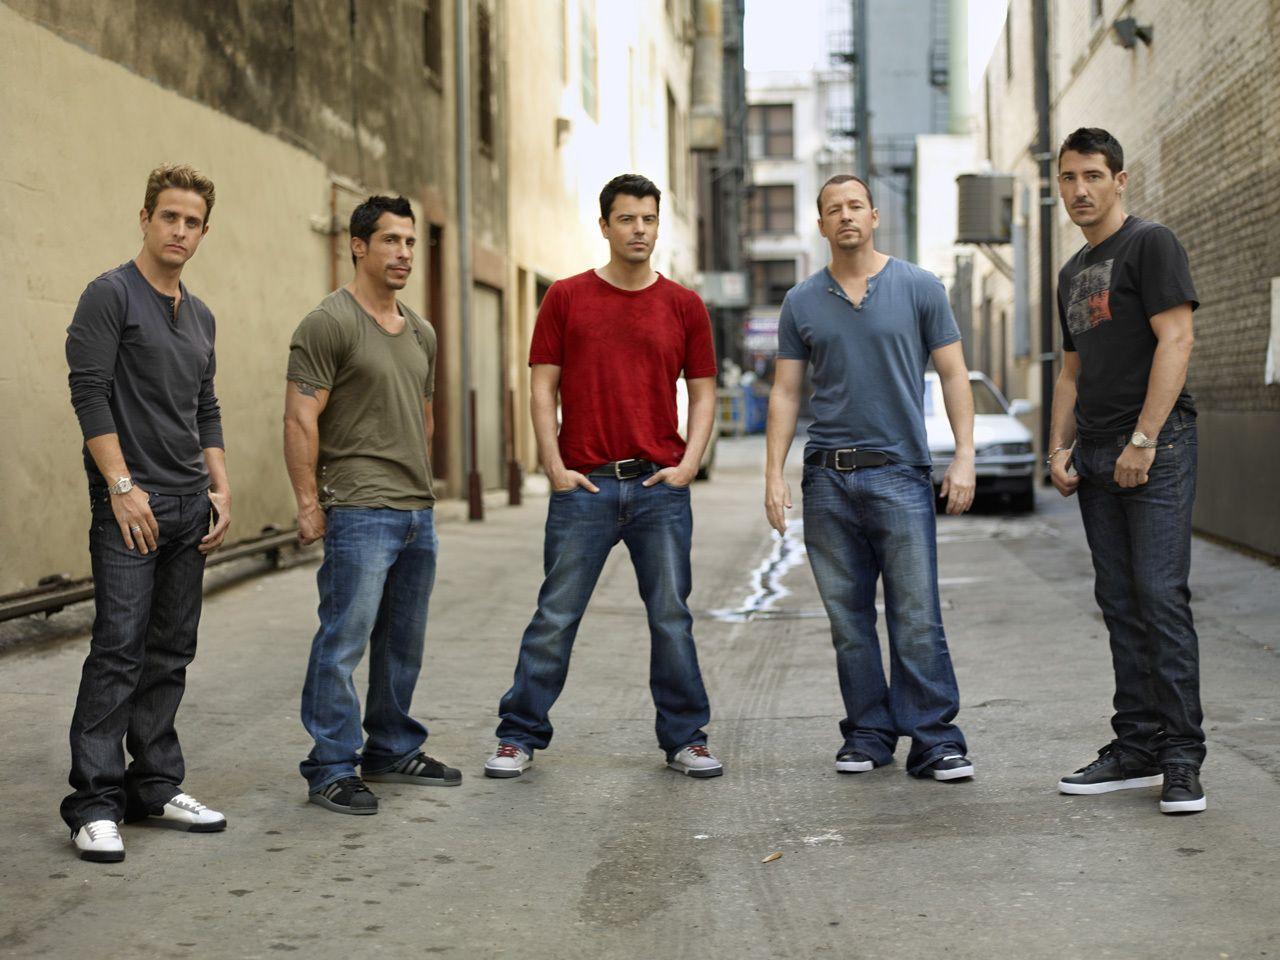 New Kids on the Block image nkotb HD wallpapers and backgrounds.